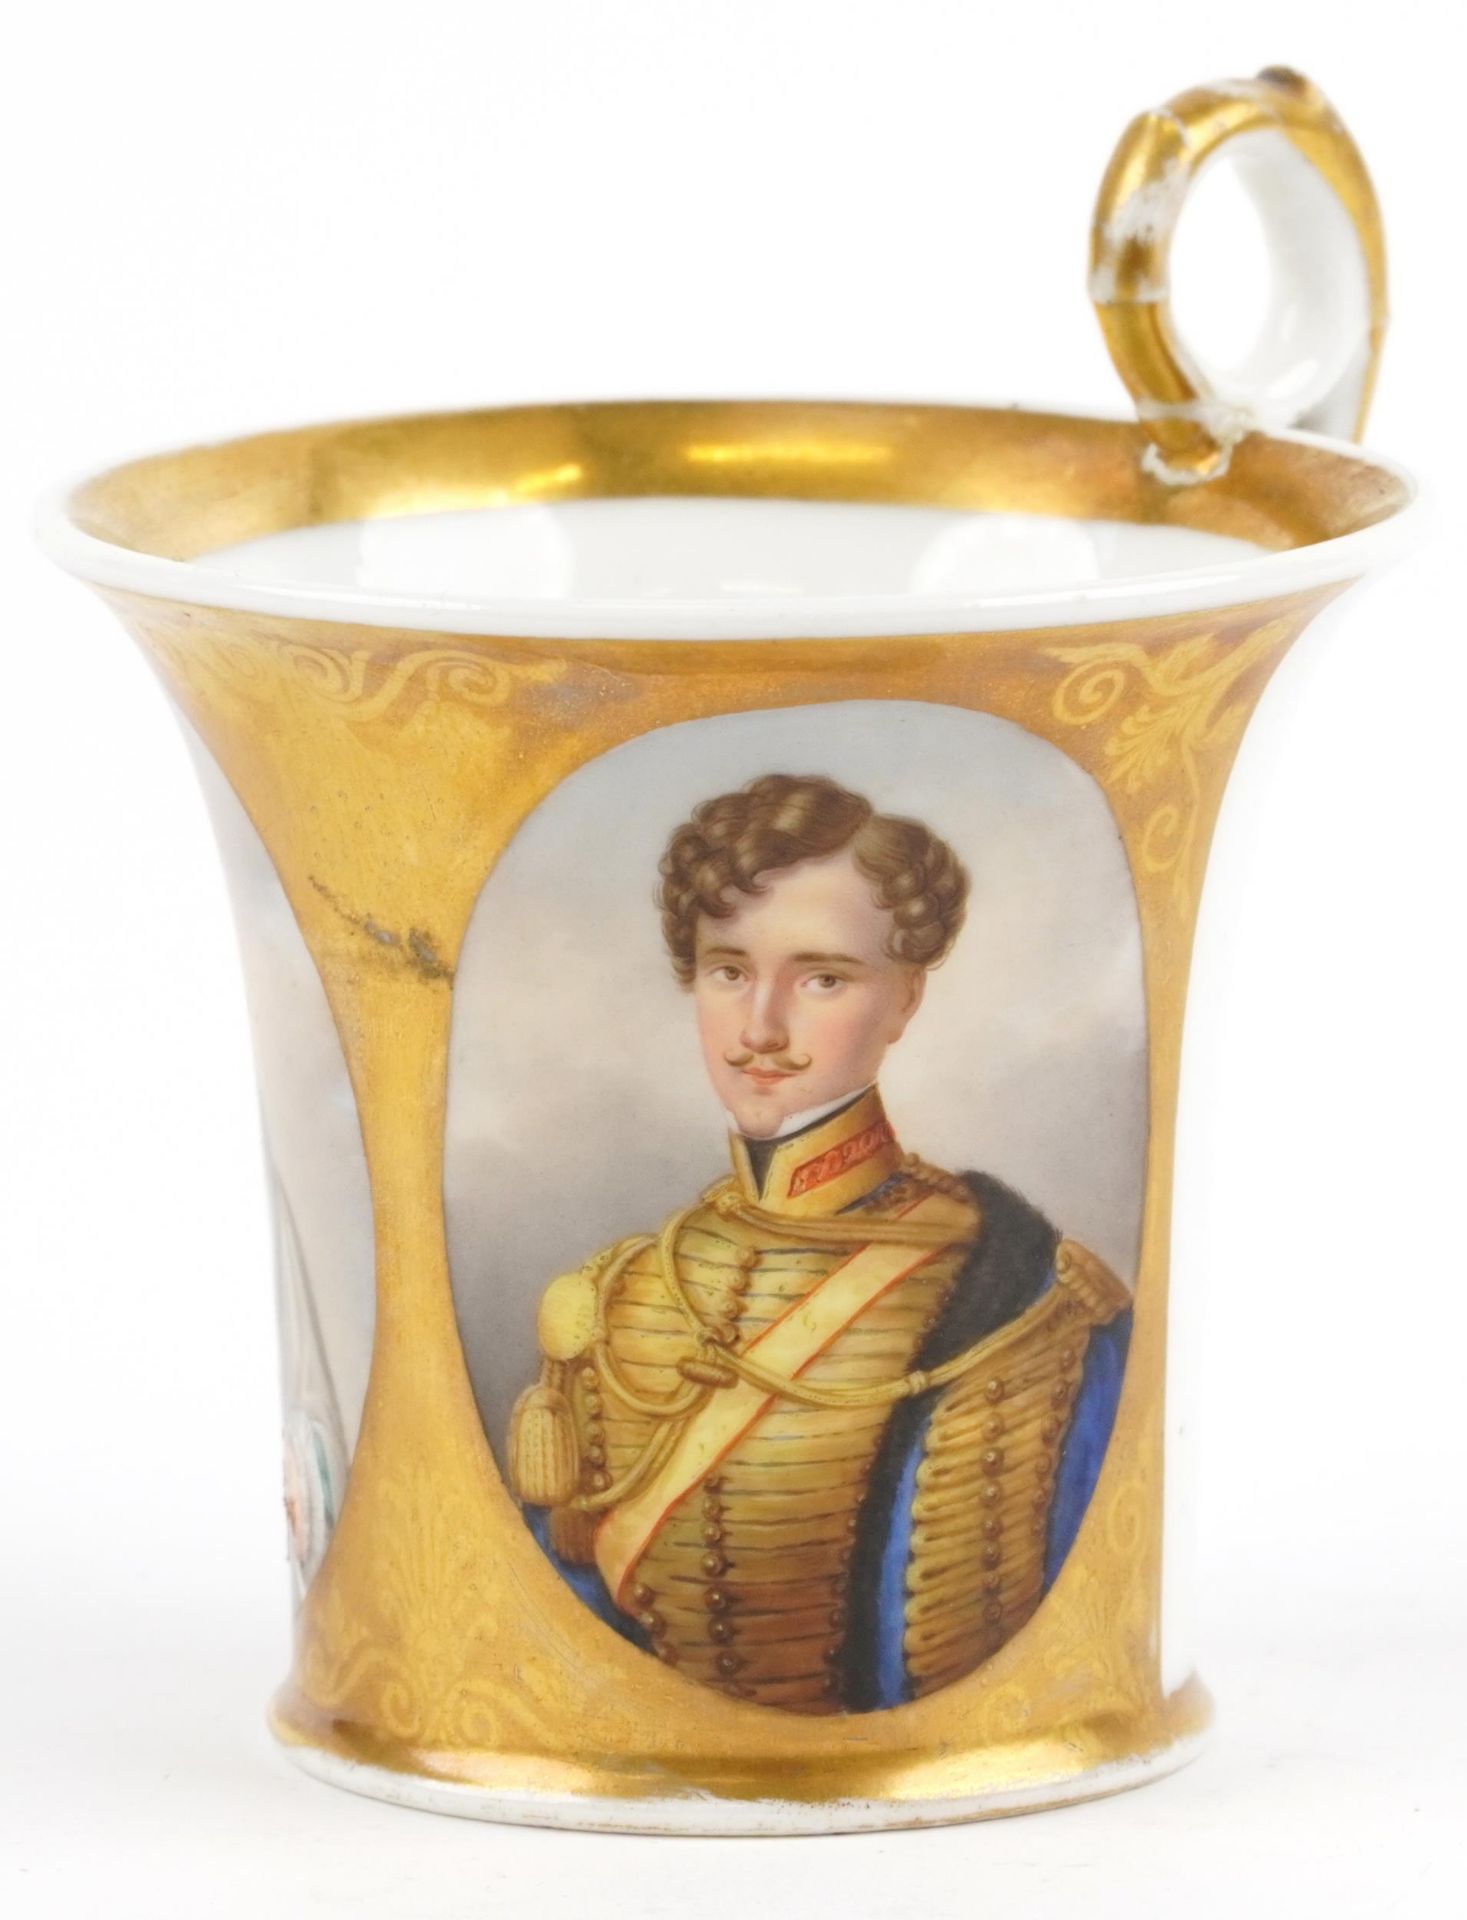 Early 19th century European porcelain cup hand painted with oval portraits of young Queen Victoria - Image 3 of 5